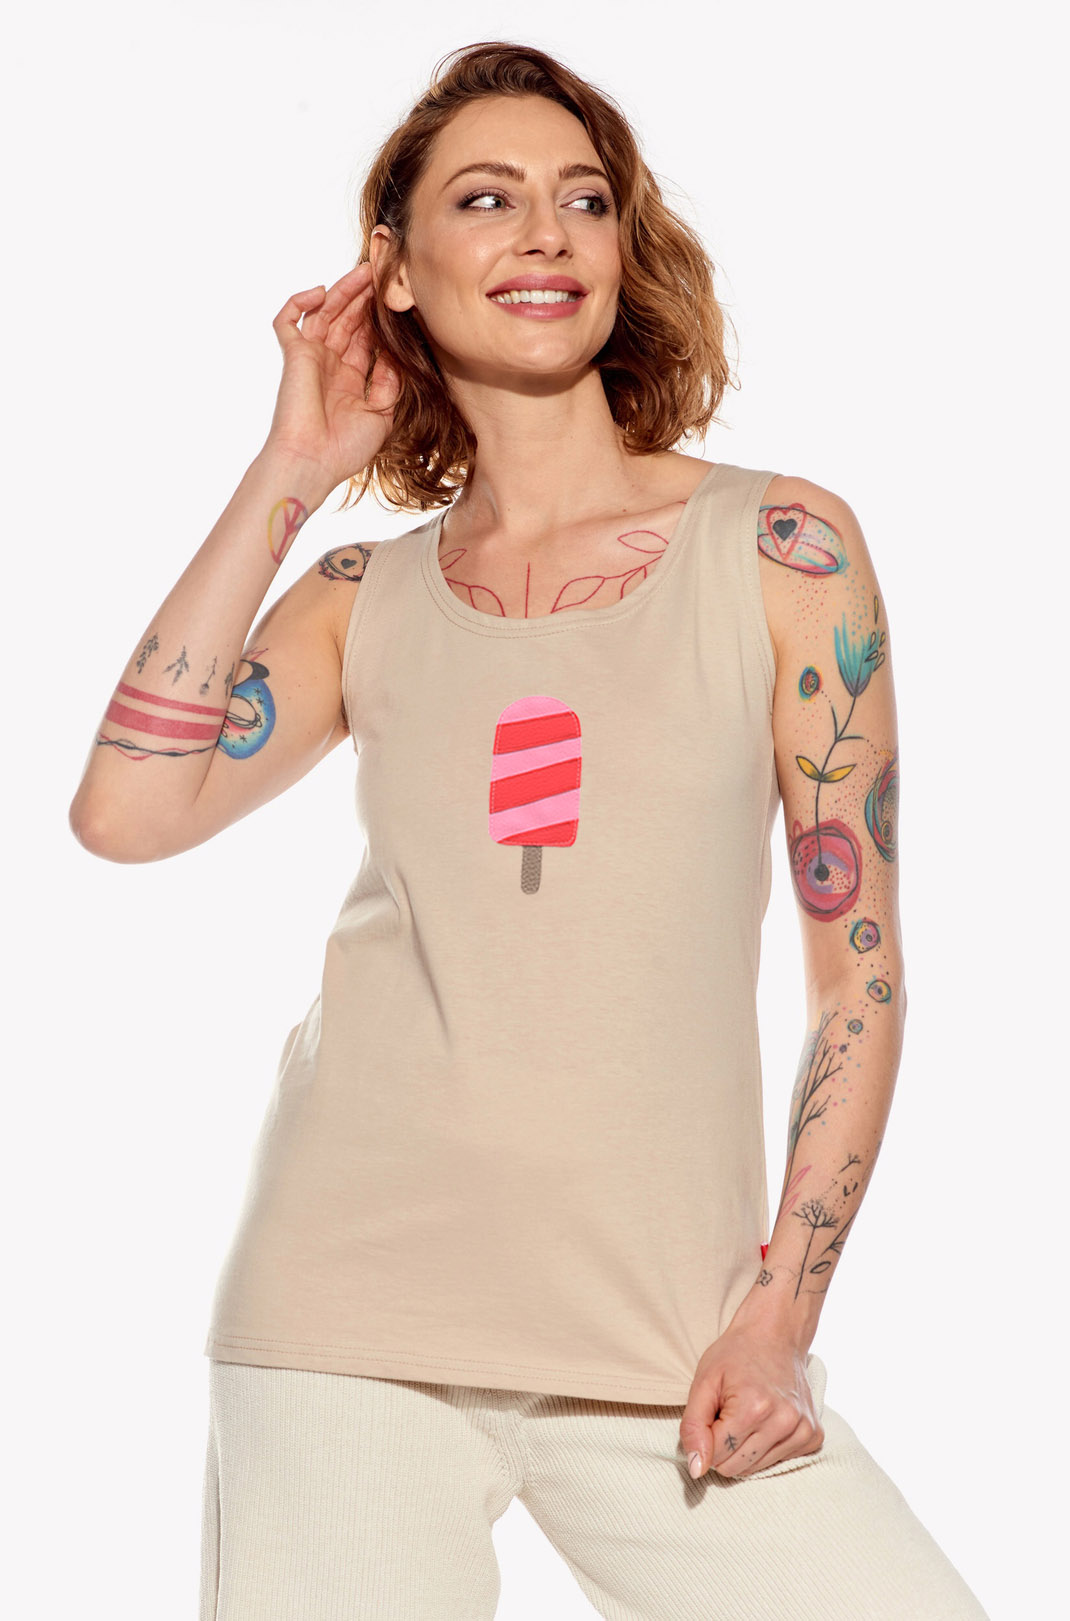 Singlet with ice lolly